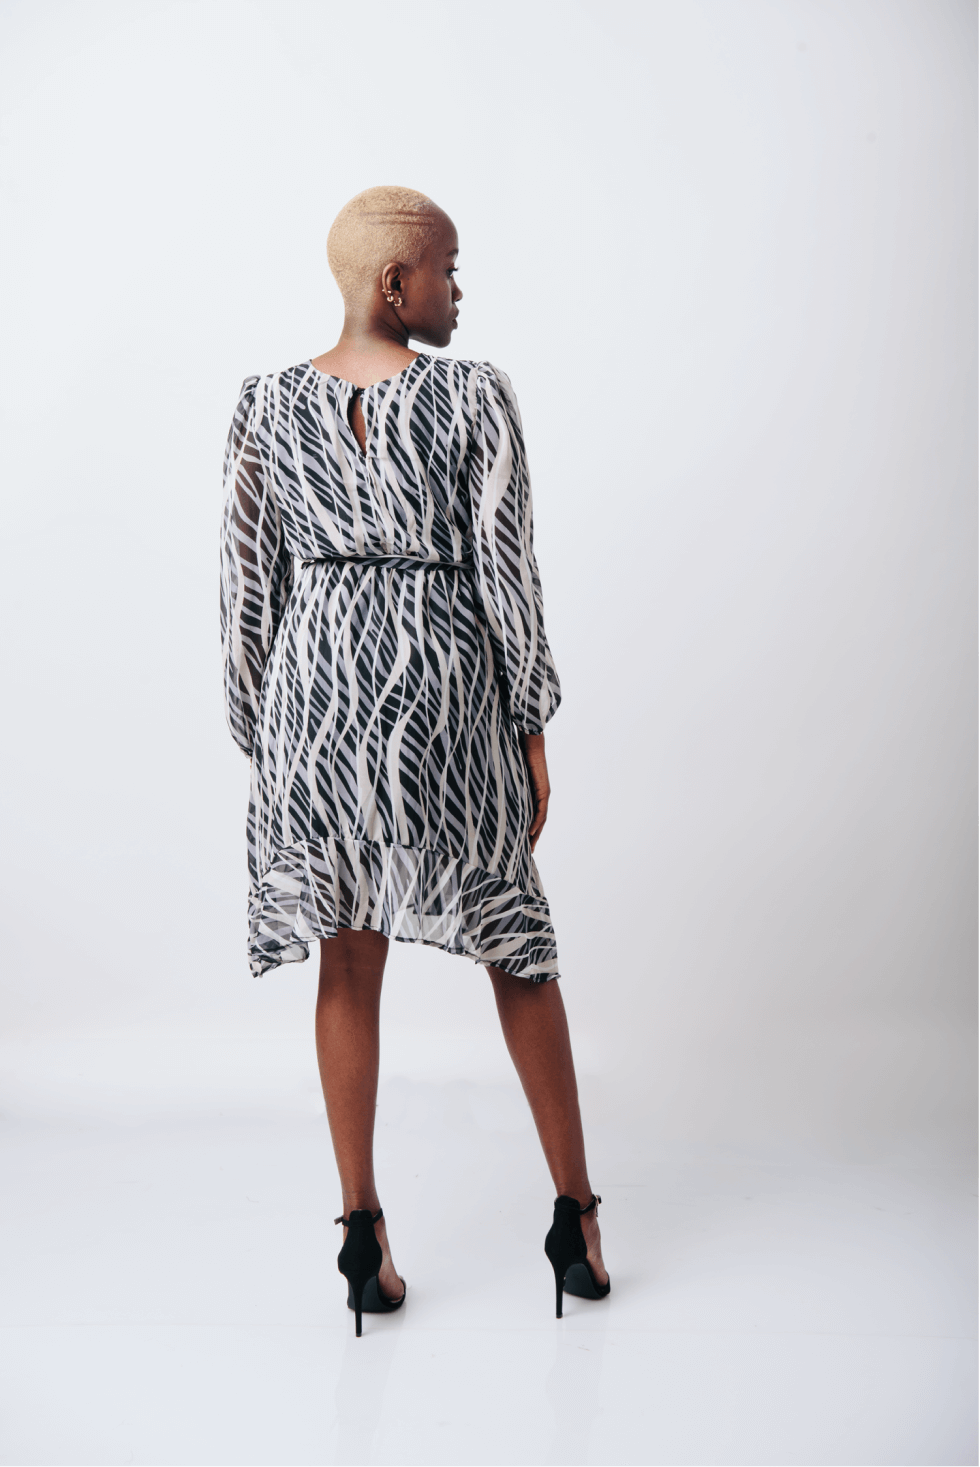 Shop Navy Printed A-line dress by The Fashion Frenzy on Arrai. Discover stylish, affordable clothing, jewelry, handbags and unique handmade pieces from top Kenyan & African fashion brands prioritising sustainability and quality craftsmanship.